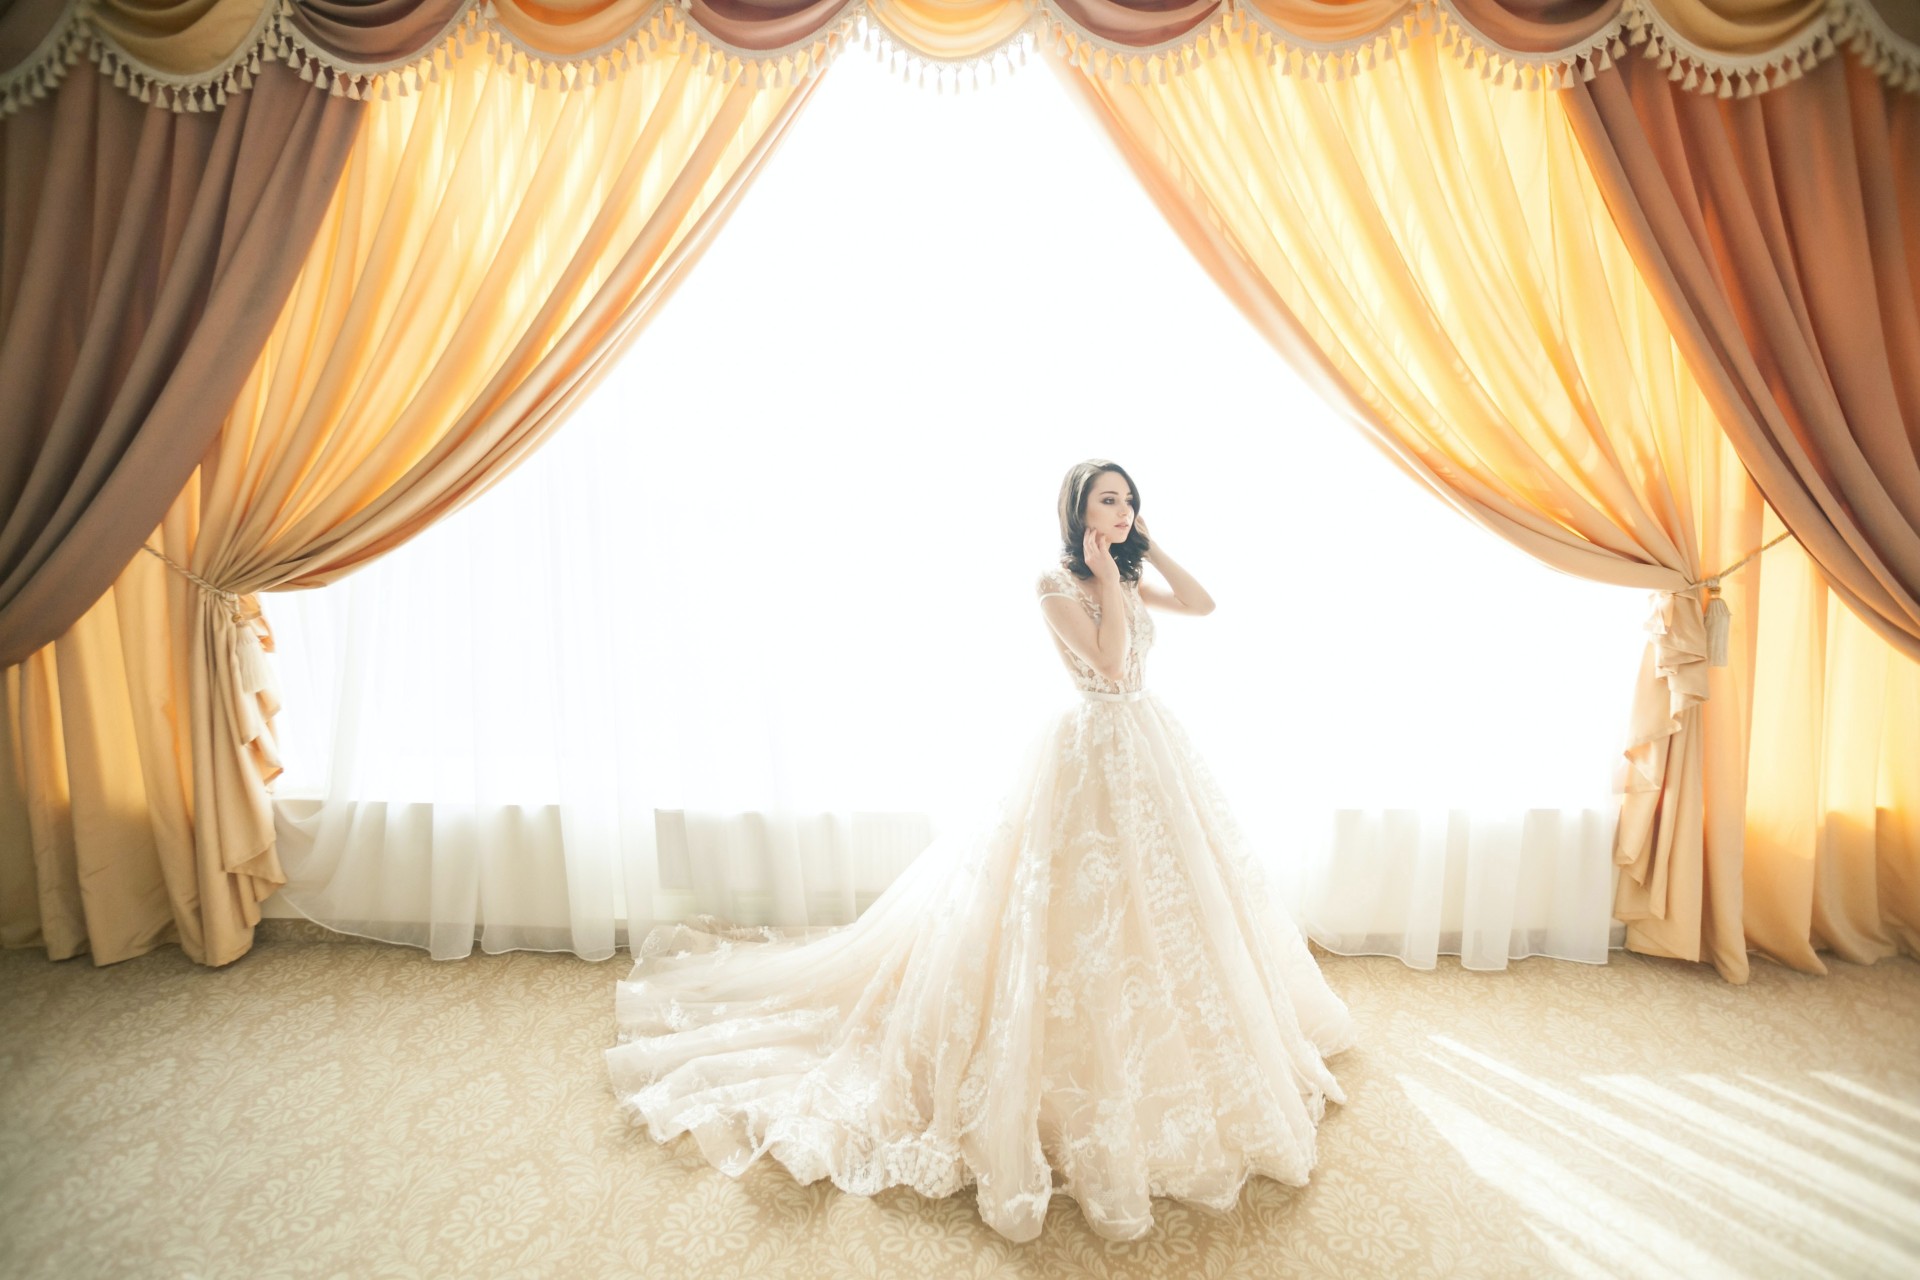 One of the beautiful gold embroidery wedding dresses against a backlit curtain with rich, warm color tones.